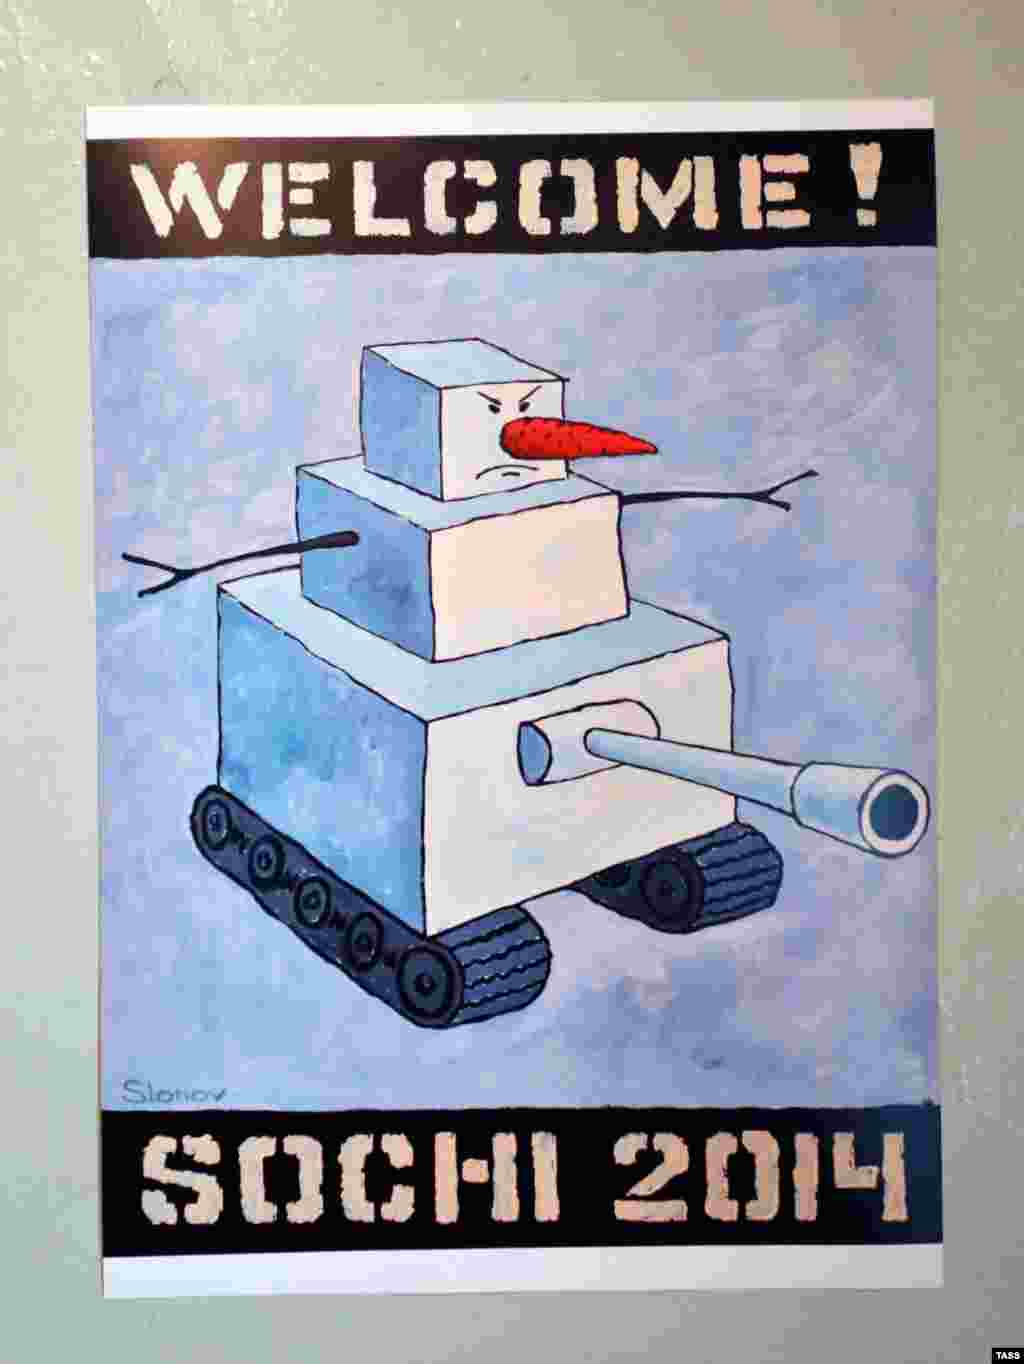 Vasily Slonov&#39;s Welcome! Sochi-2014 poster with a tank-shaped snowman.